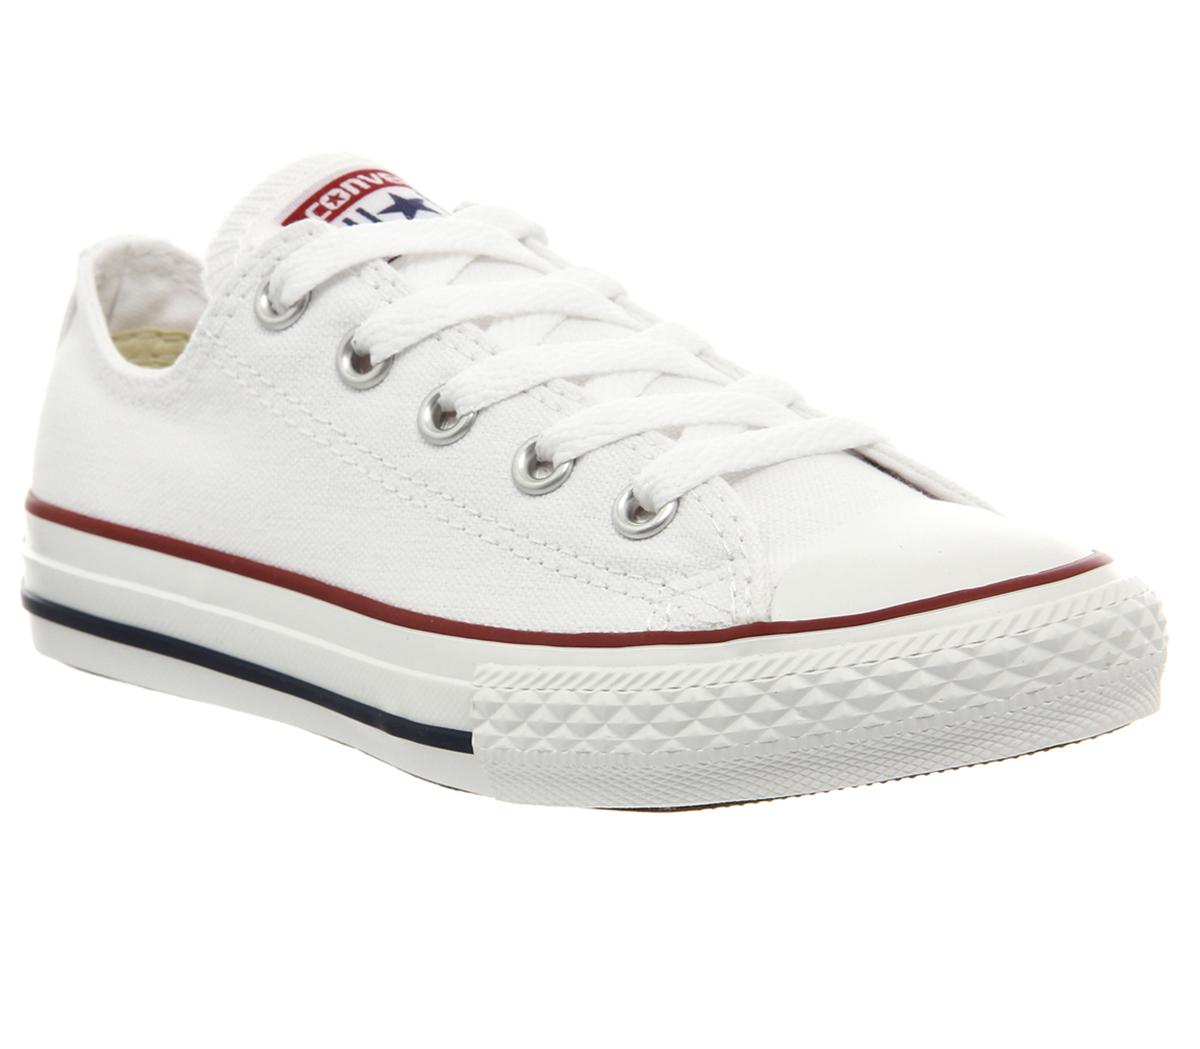 converse all star low youth optical white leather